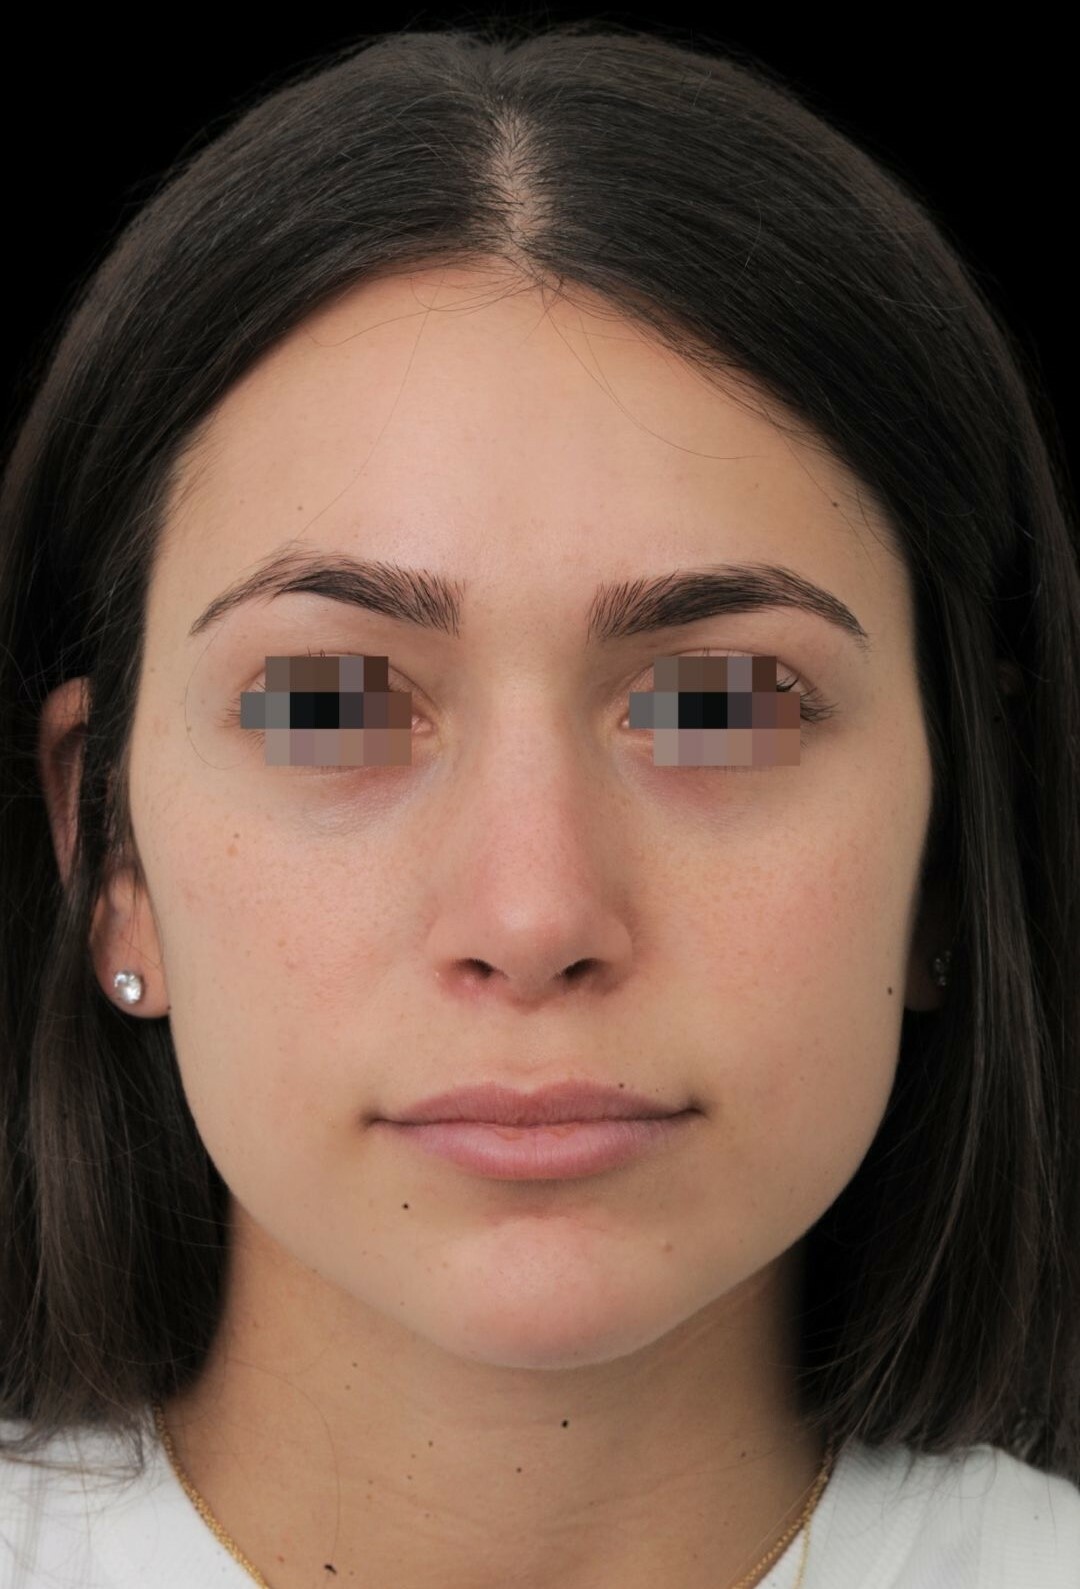 Photo of the patient’s face after the Rhinoplasty surgery. Patient 14 - Set 3